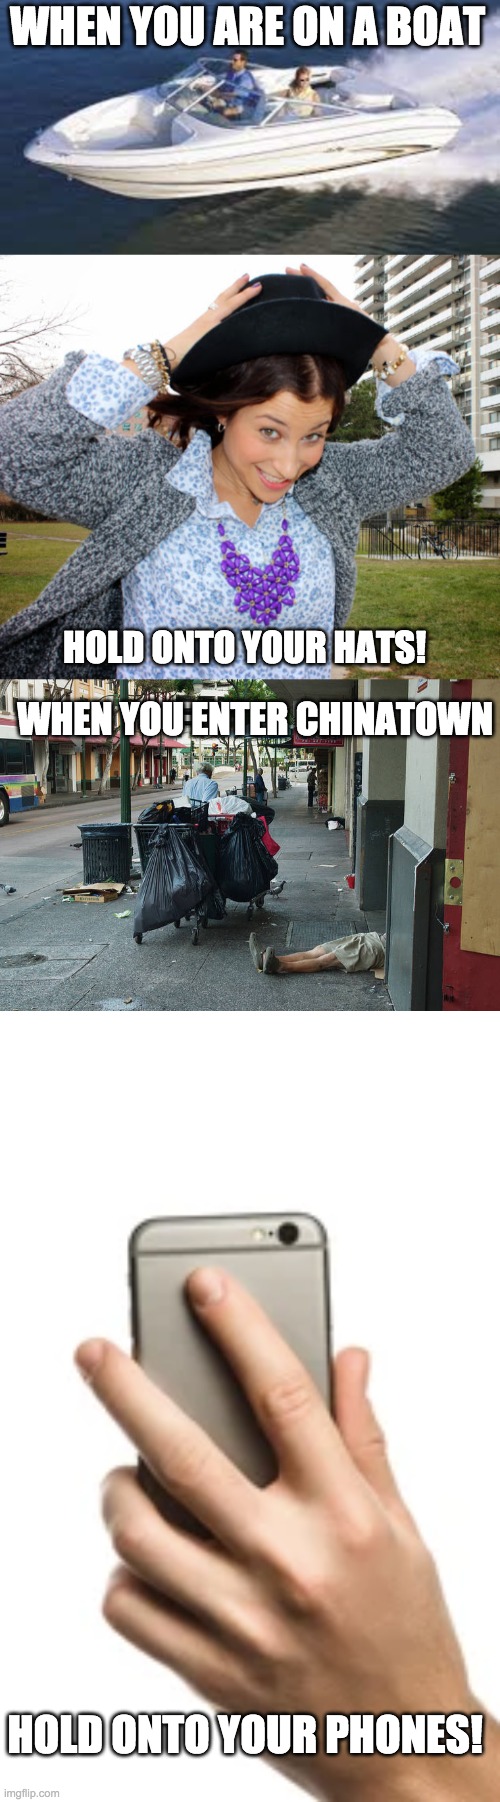 Not safe |  WHEN YOU ARE ON A BOAT; HOLD ONTO YOUR HATS! WHEN YOU ENTER CHINATOWN; HOLD ONTO YOUR PHONES! | image tagged in china,homeless,dangerous,phone | made w/ Imgflip meme maker